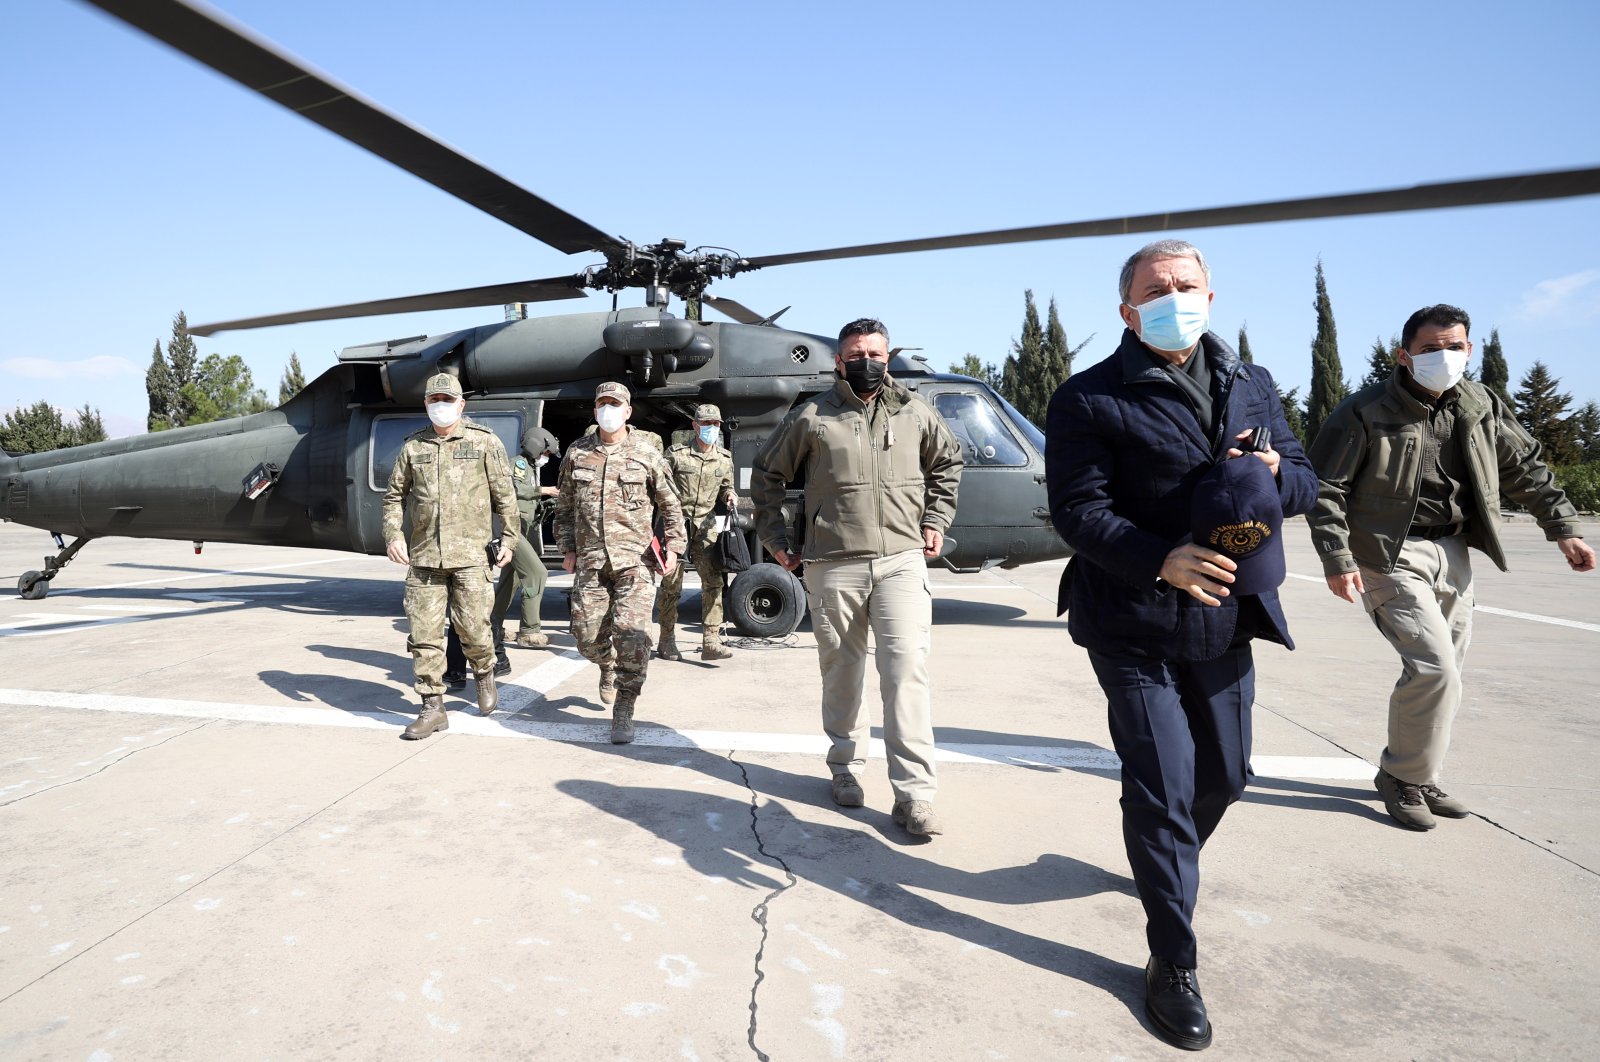 National Defense Minister Hulusi Akar and military officials get off a helicopter and walk toward the Iraqi border on Feb. 14, 2021. (AA Photo)